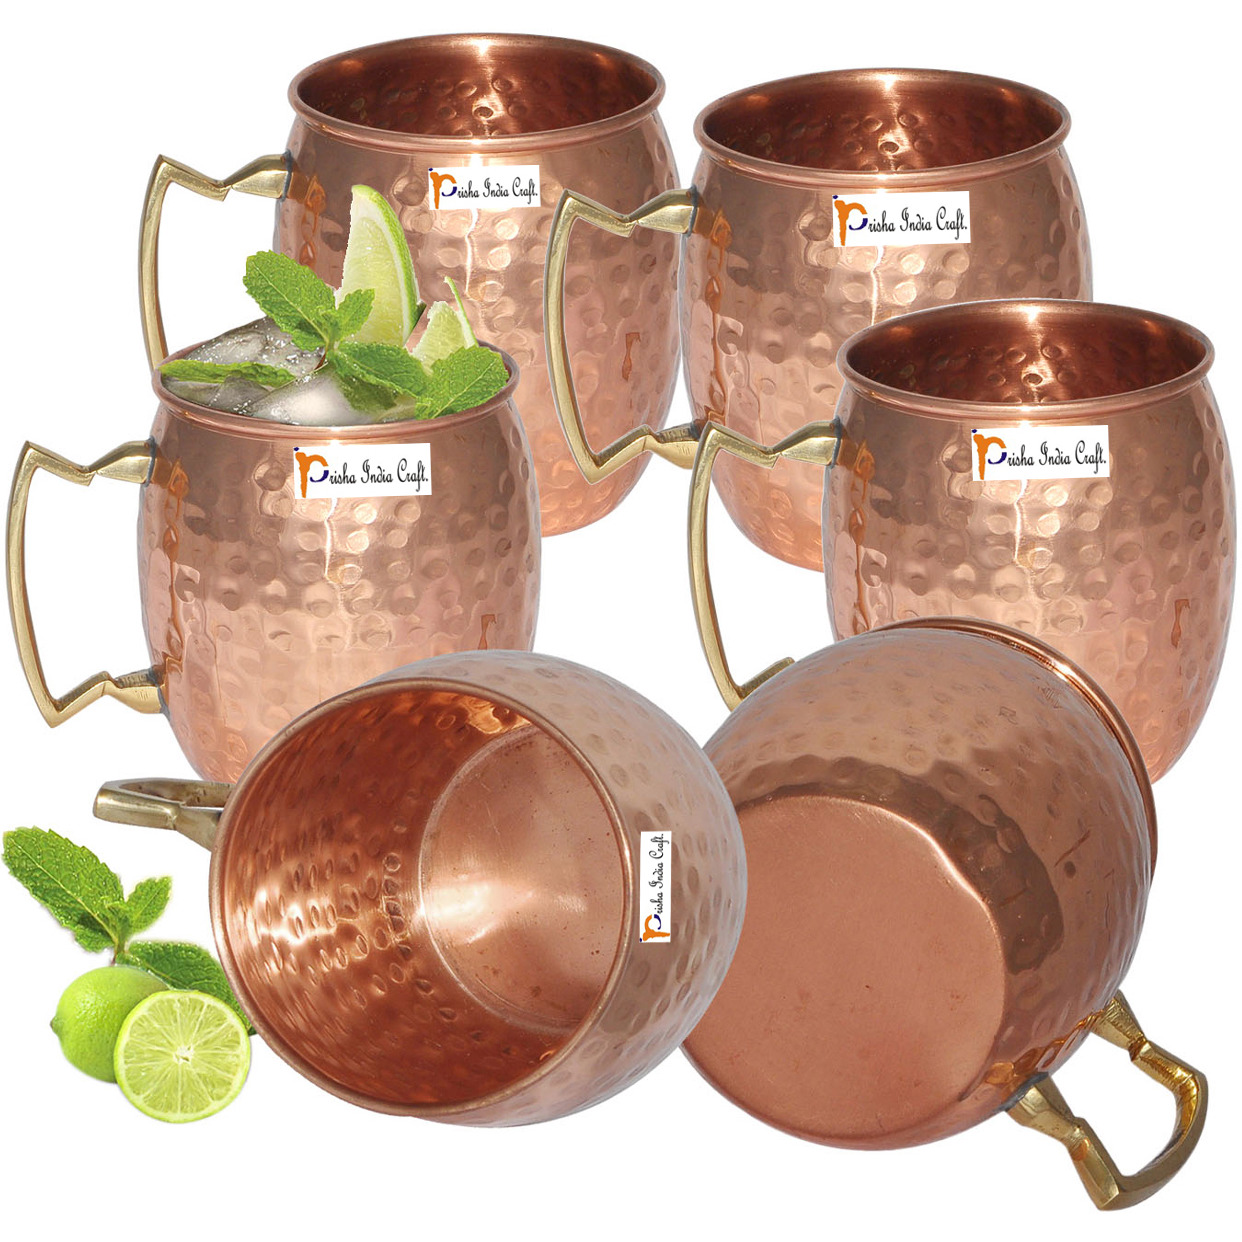 Set of 6 - Prisha India Craft B. Moscow Mule Solid Copper Mug 550 ML / 18 oz - 100% Pure Copper Hammered Best Quality Lacquered Finish, Cocktail Cup, Copper Mugs, Cocktail Mugs with No Inner Linings